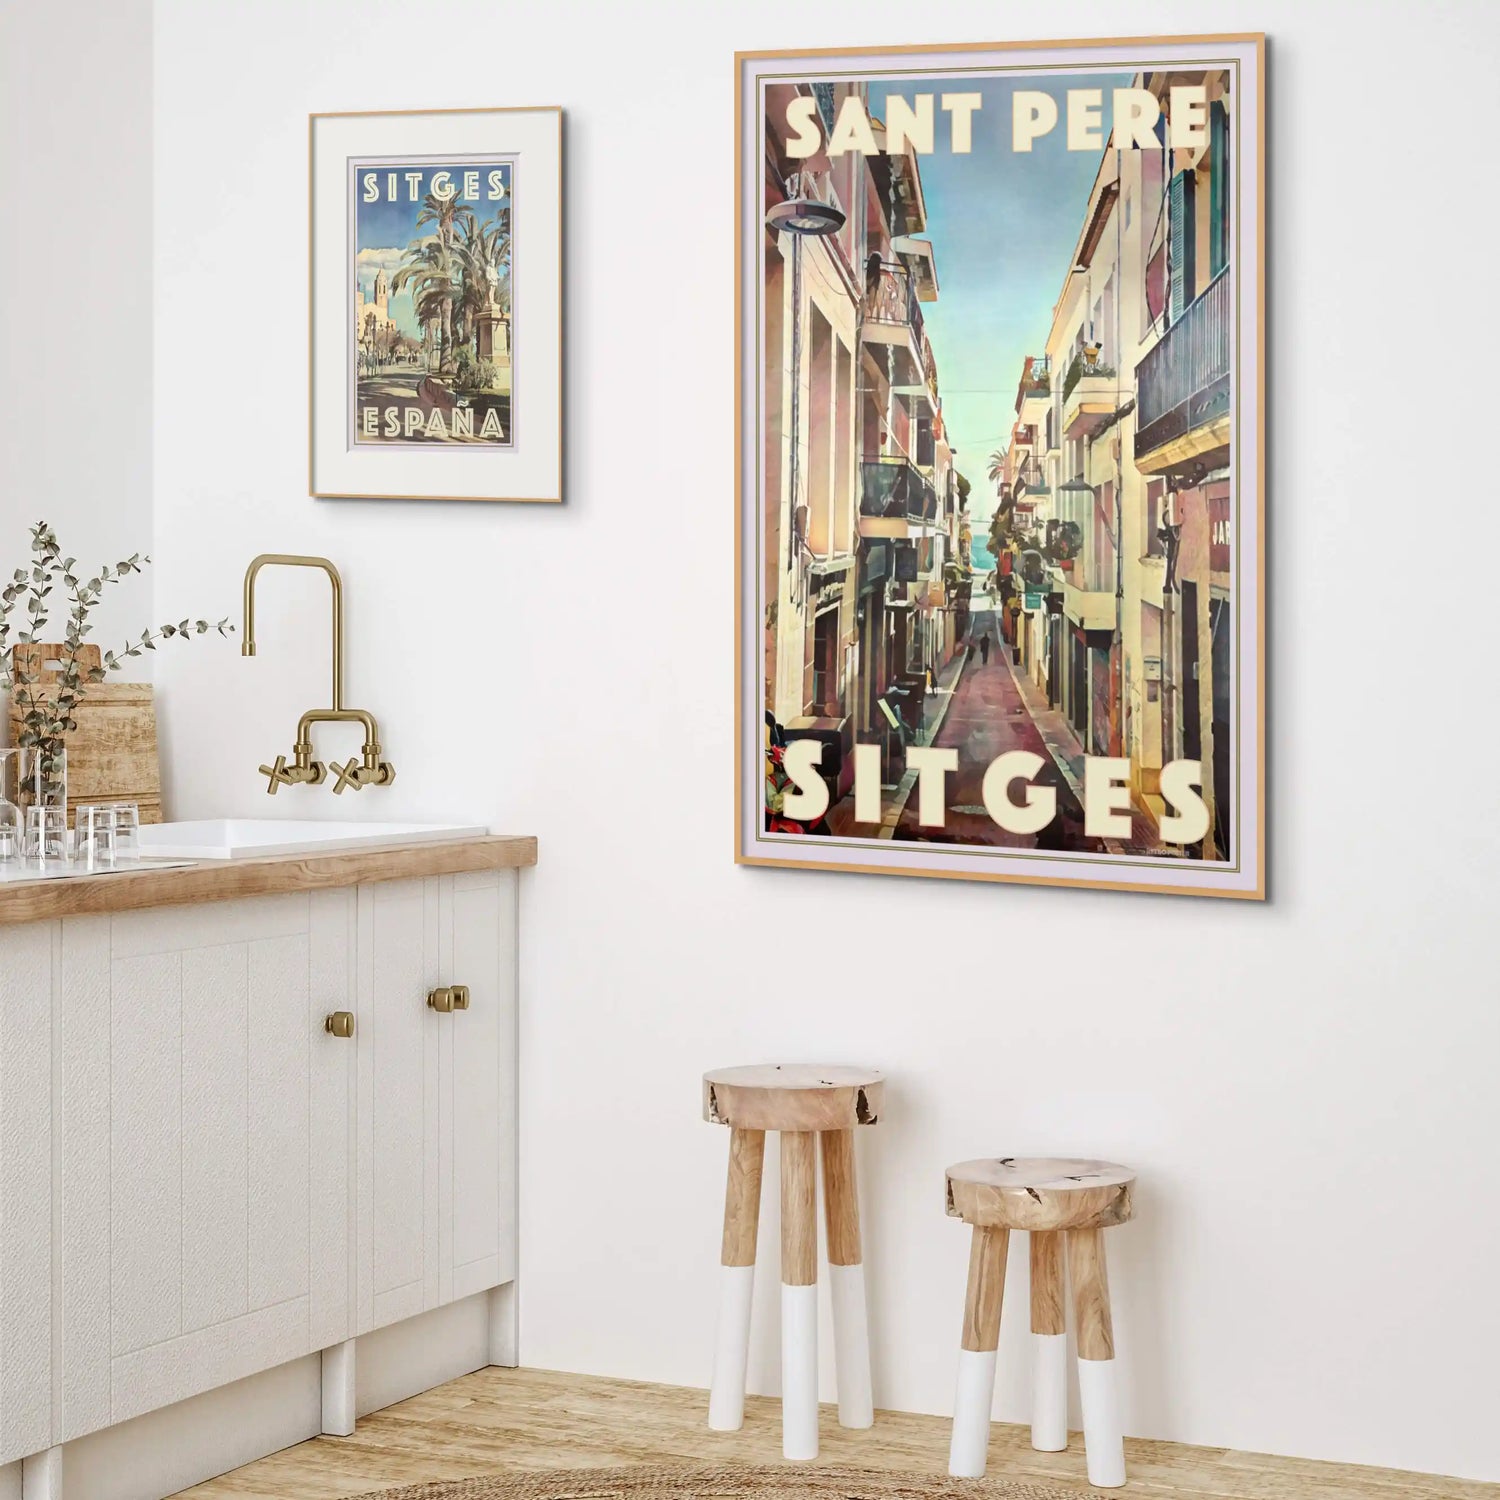 Sitges Travel Poster Collection | My Retro Poster